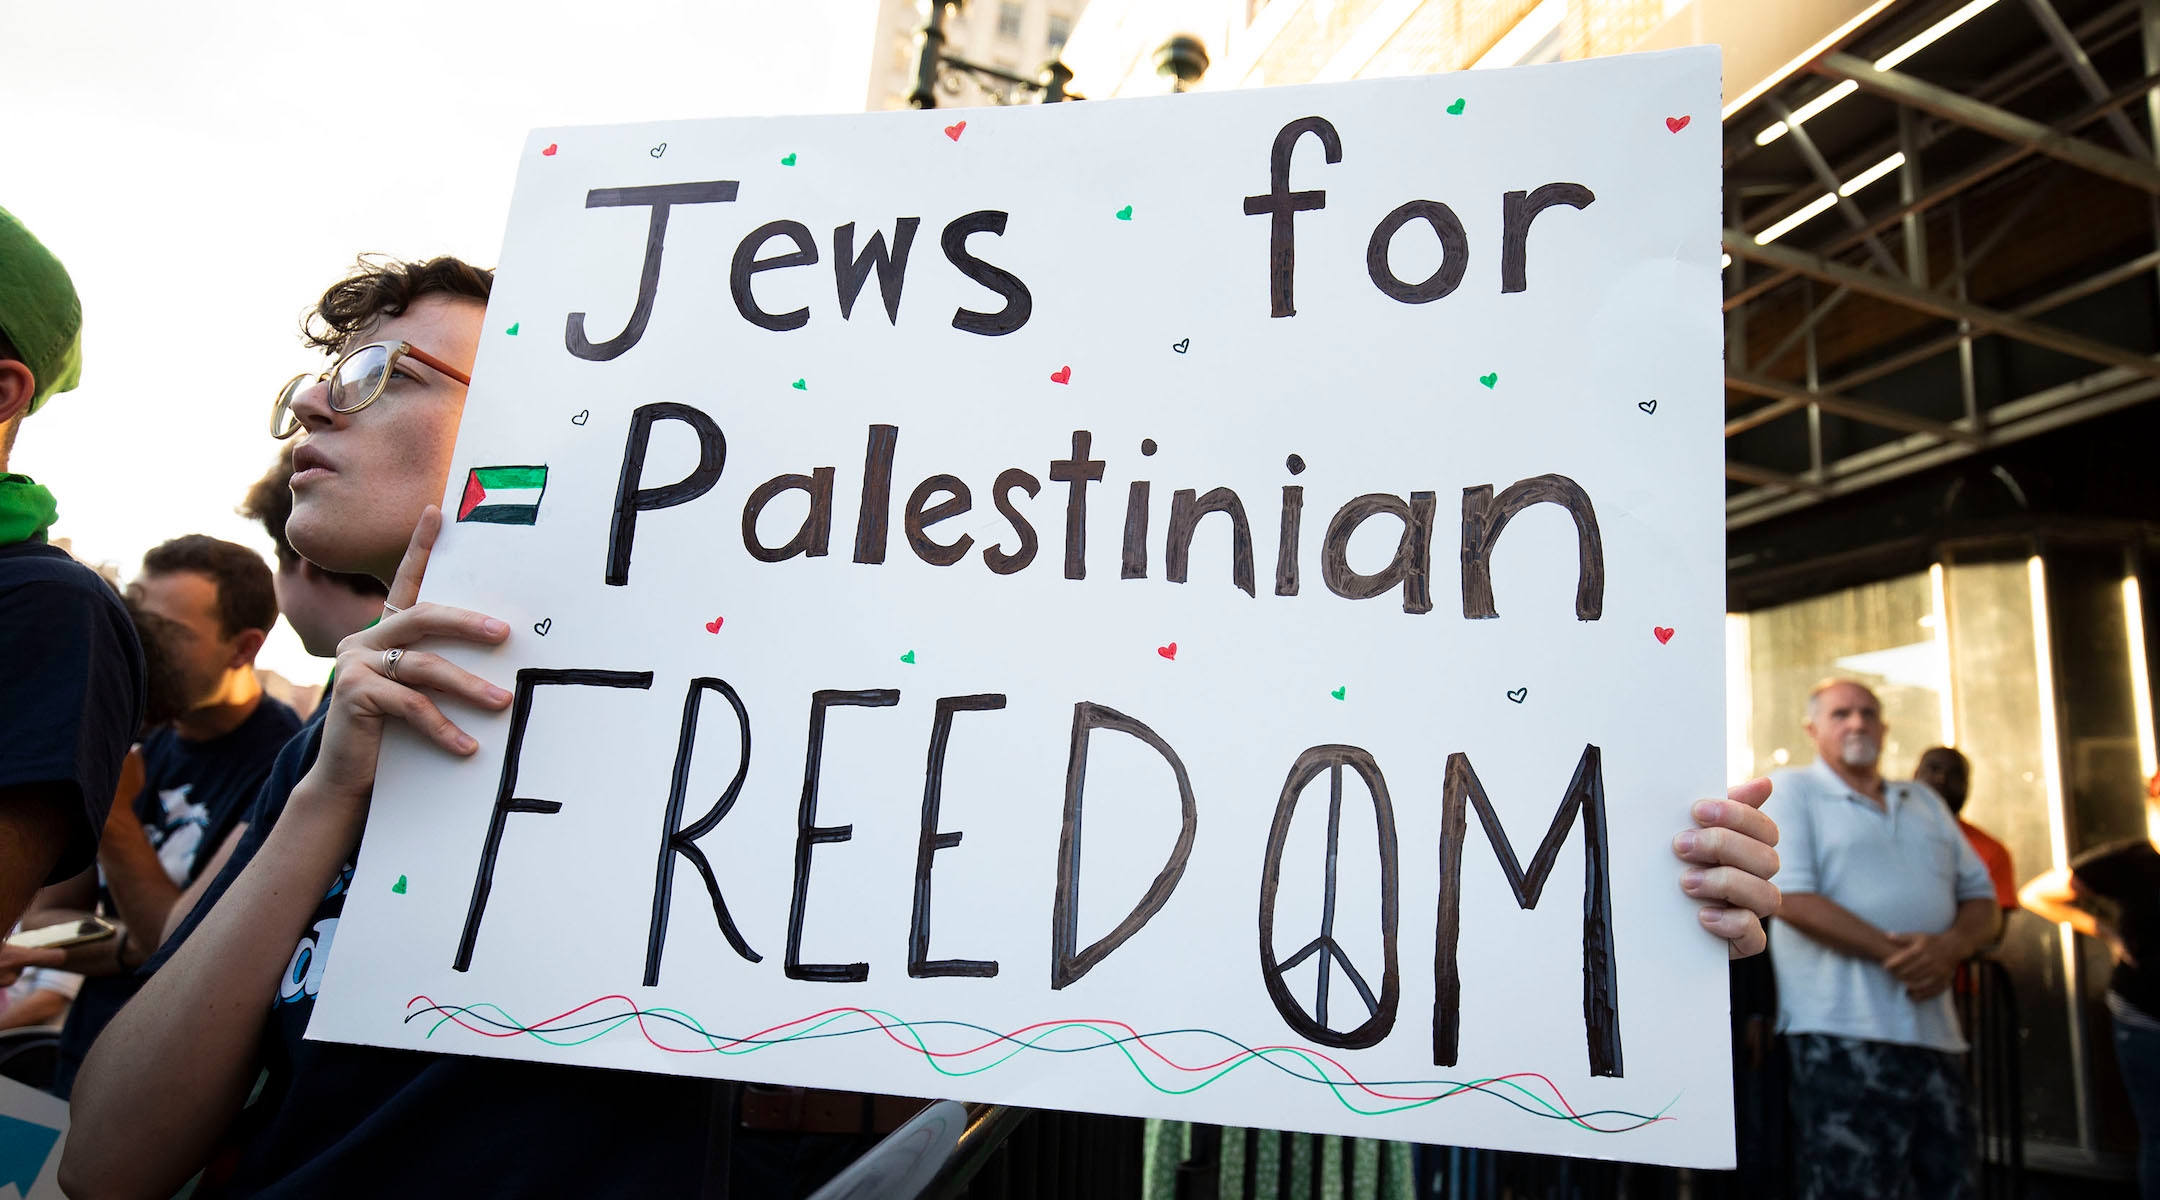 An attendee at a campaign rally holding a sign reading "Jews for Palestinian Freedom"